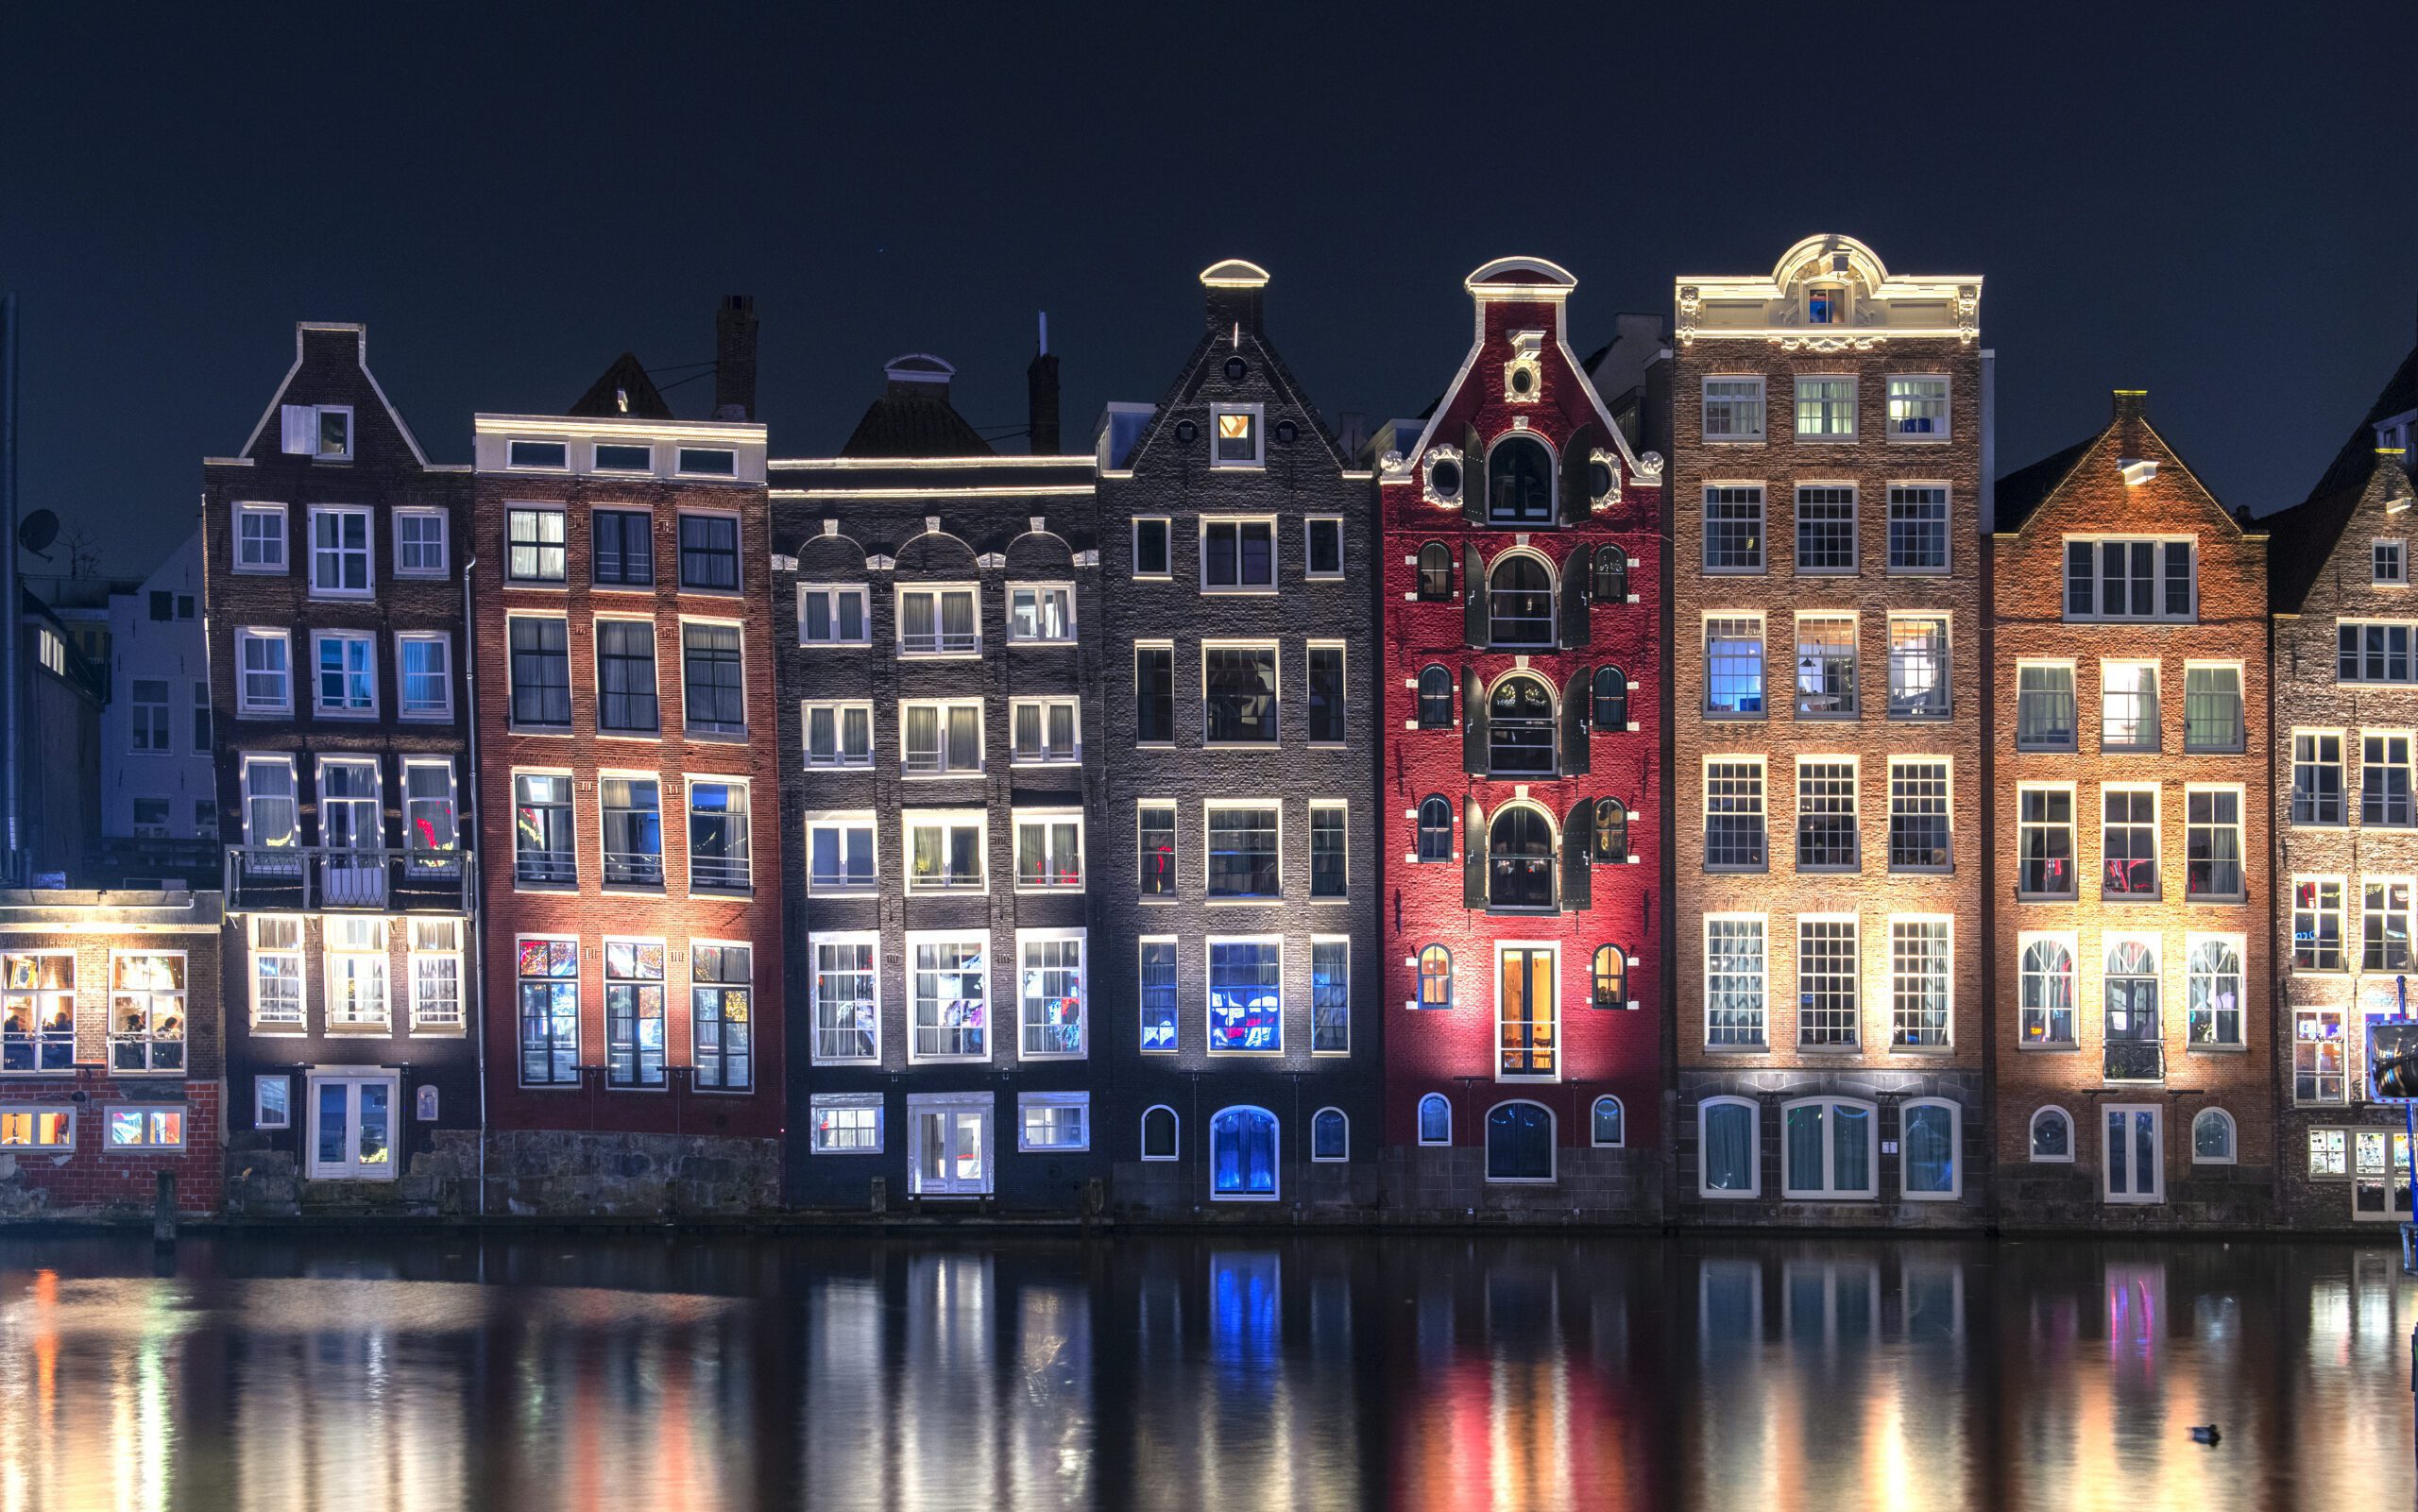 Typical Amsterdam houses with reflection in the water